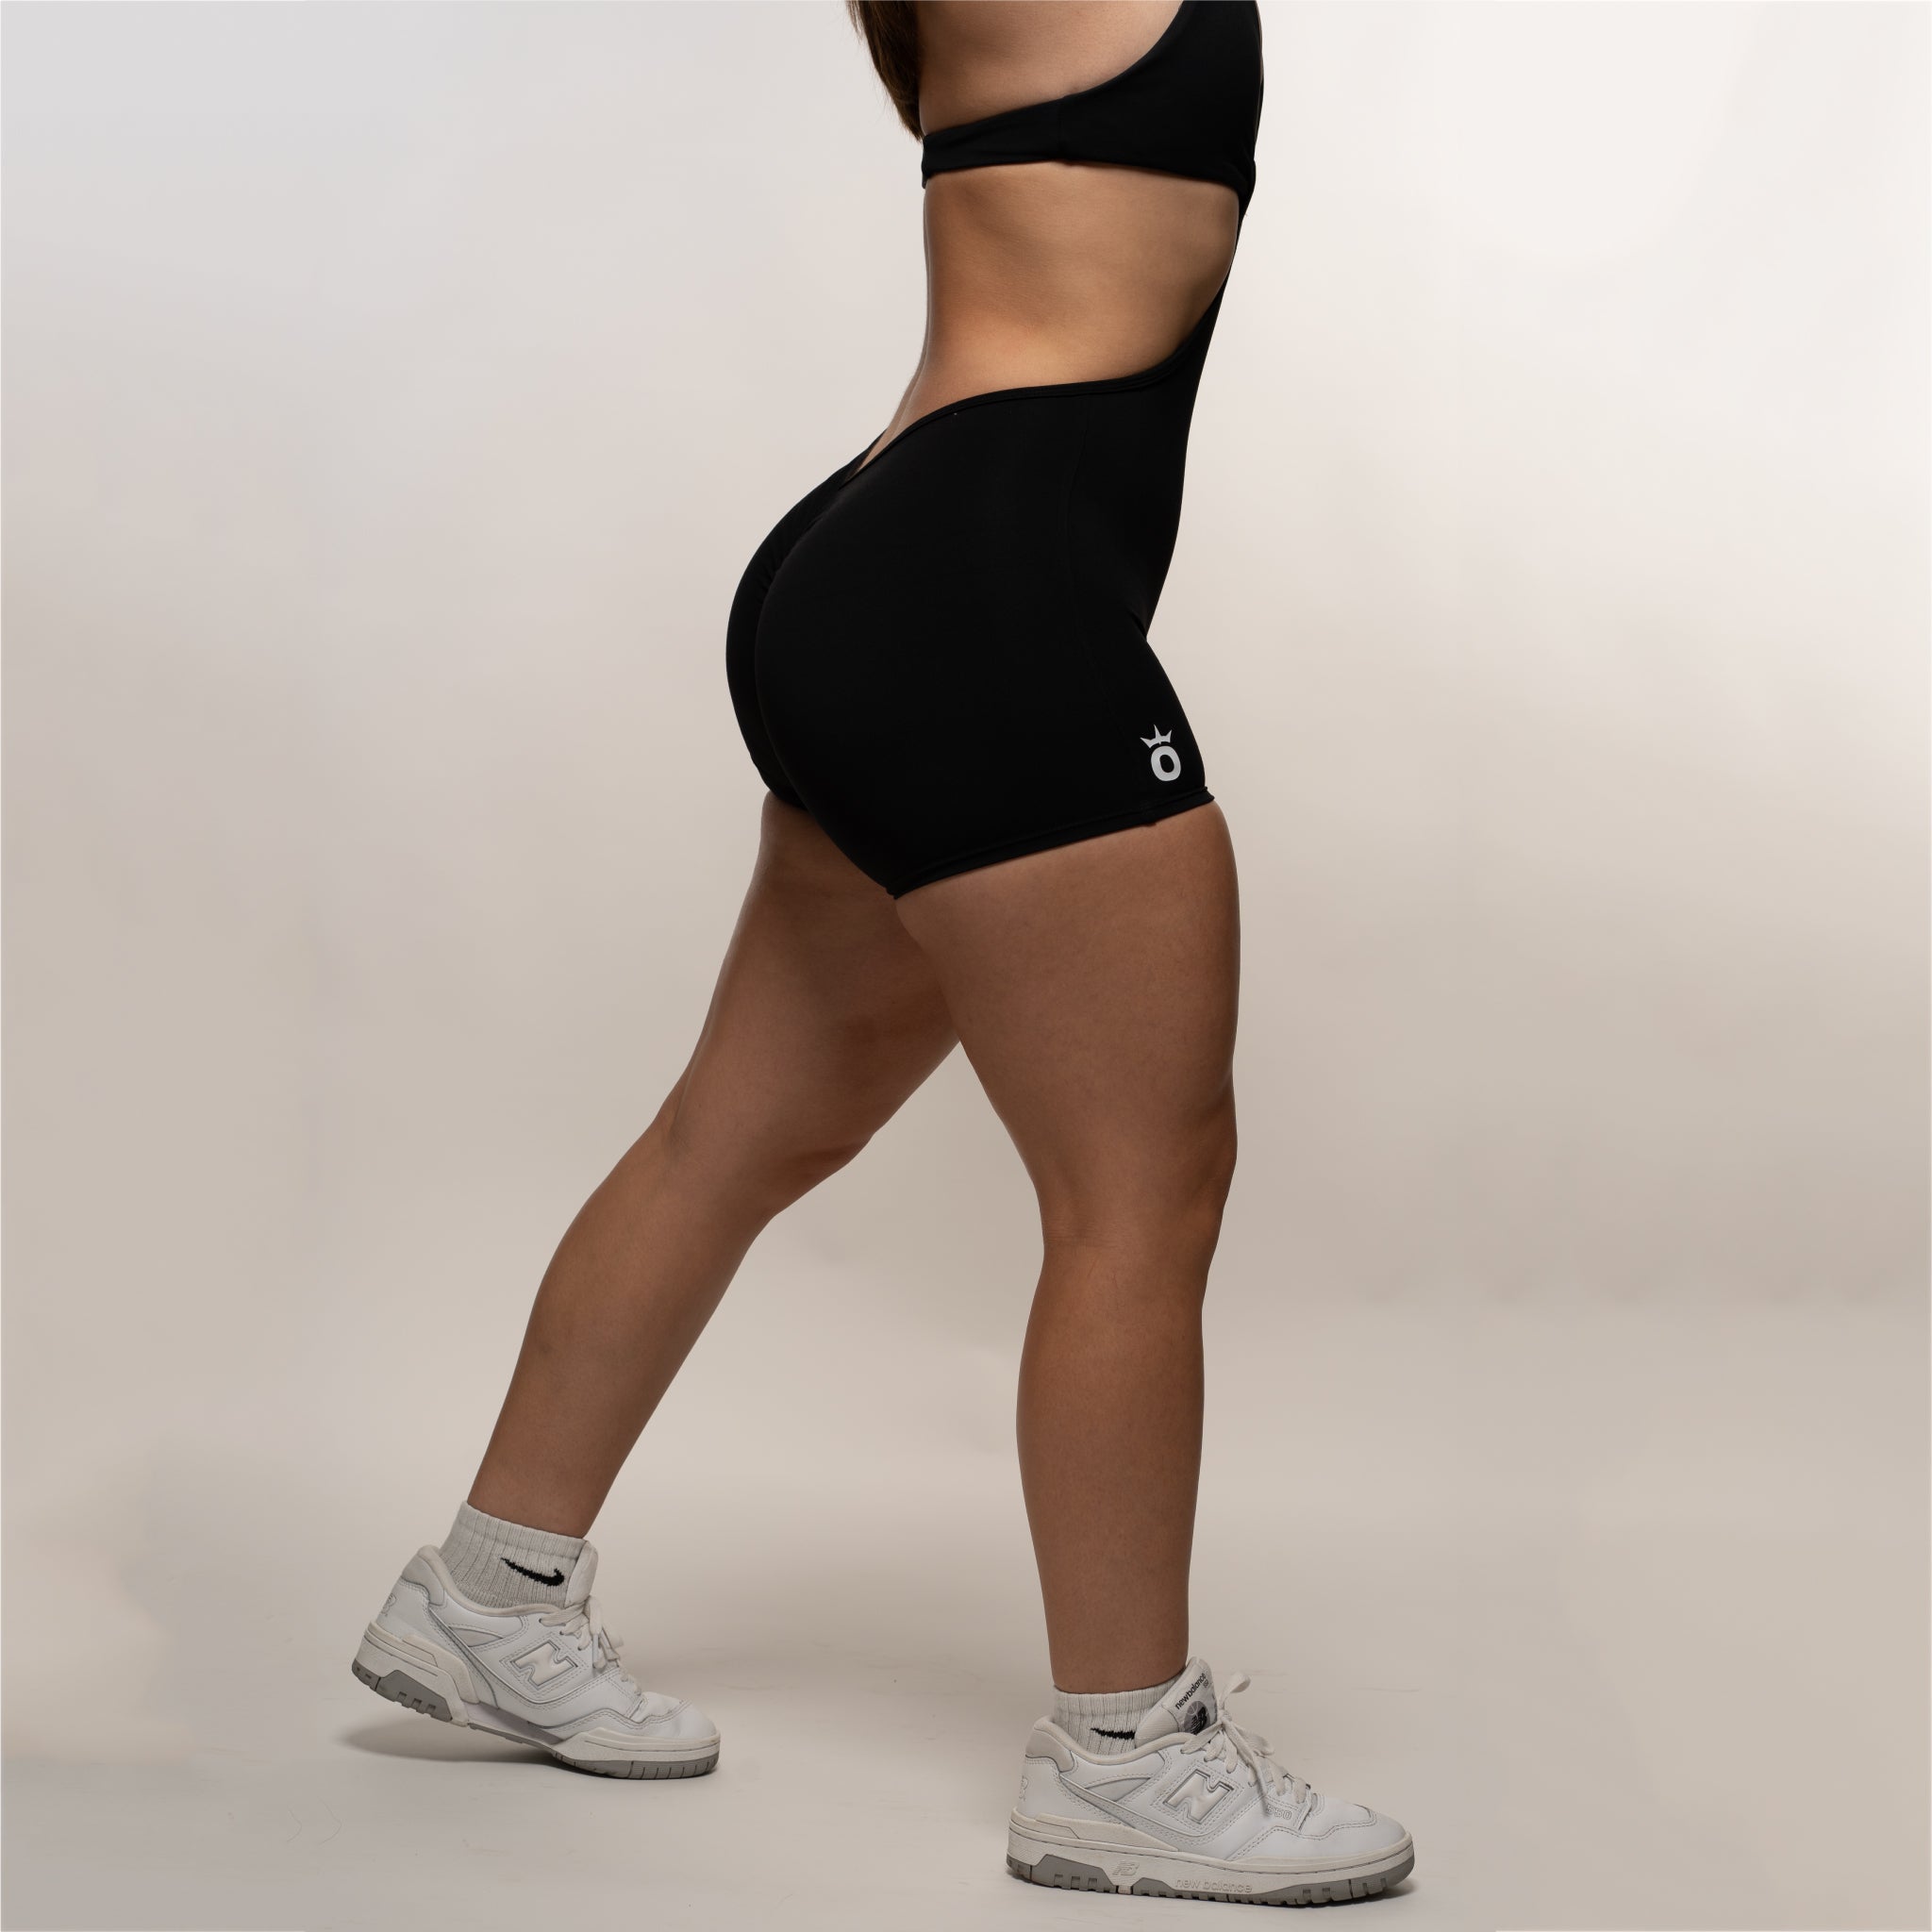 CRUSH BODYSUIT SHORTS: High-Support Women's Activewear for Squats